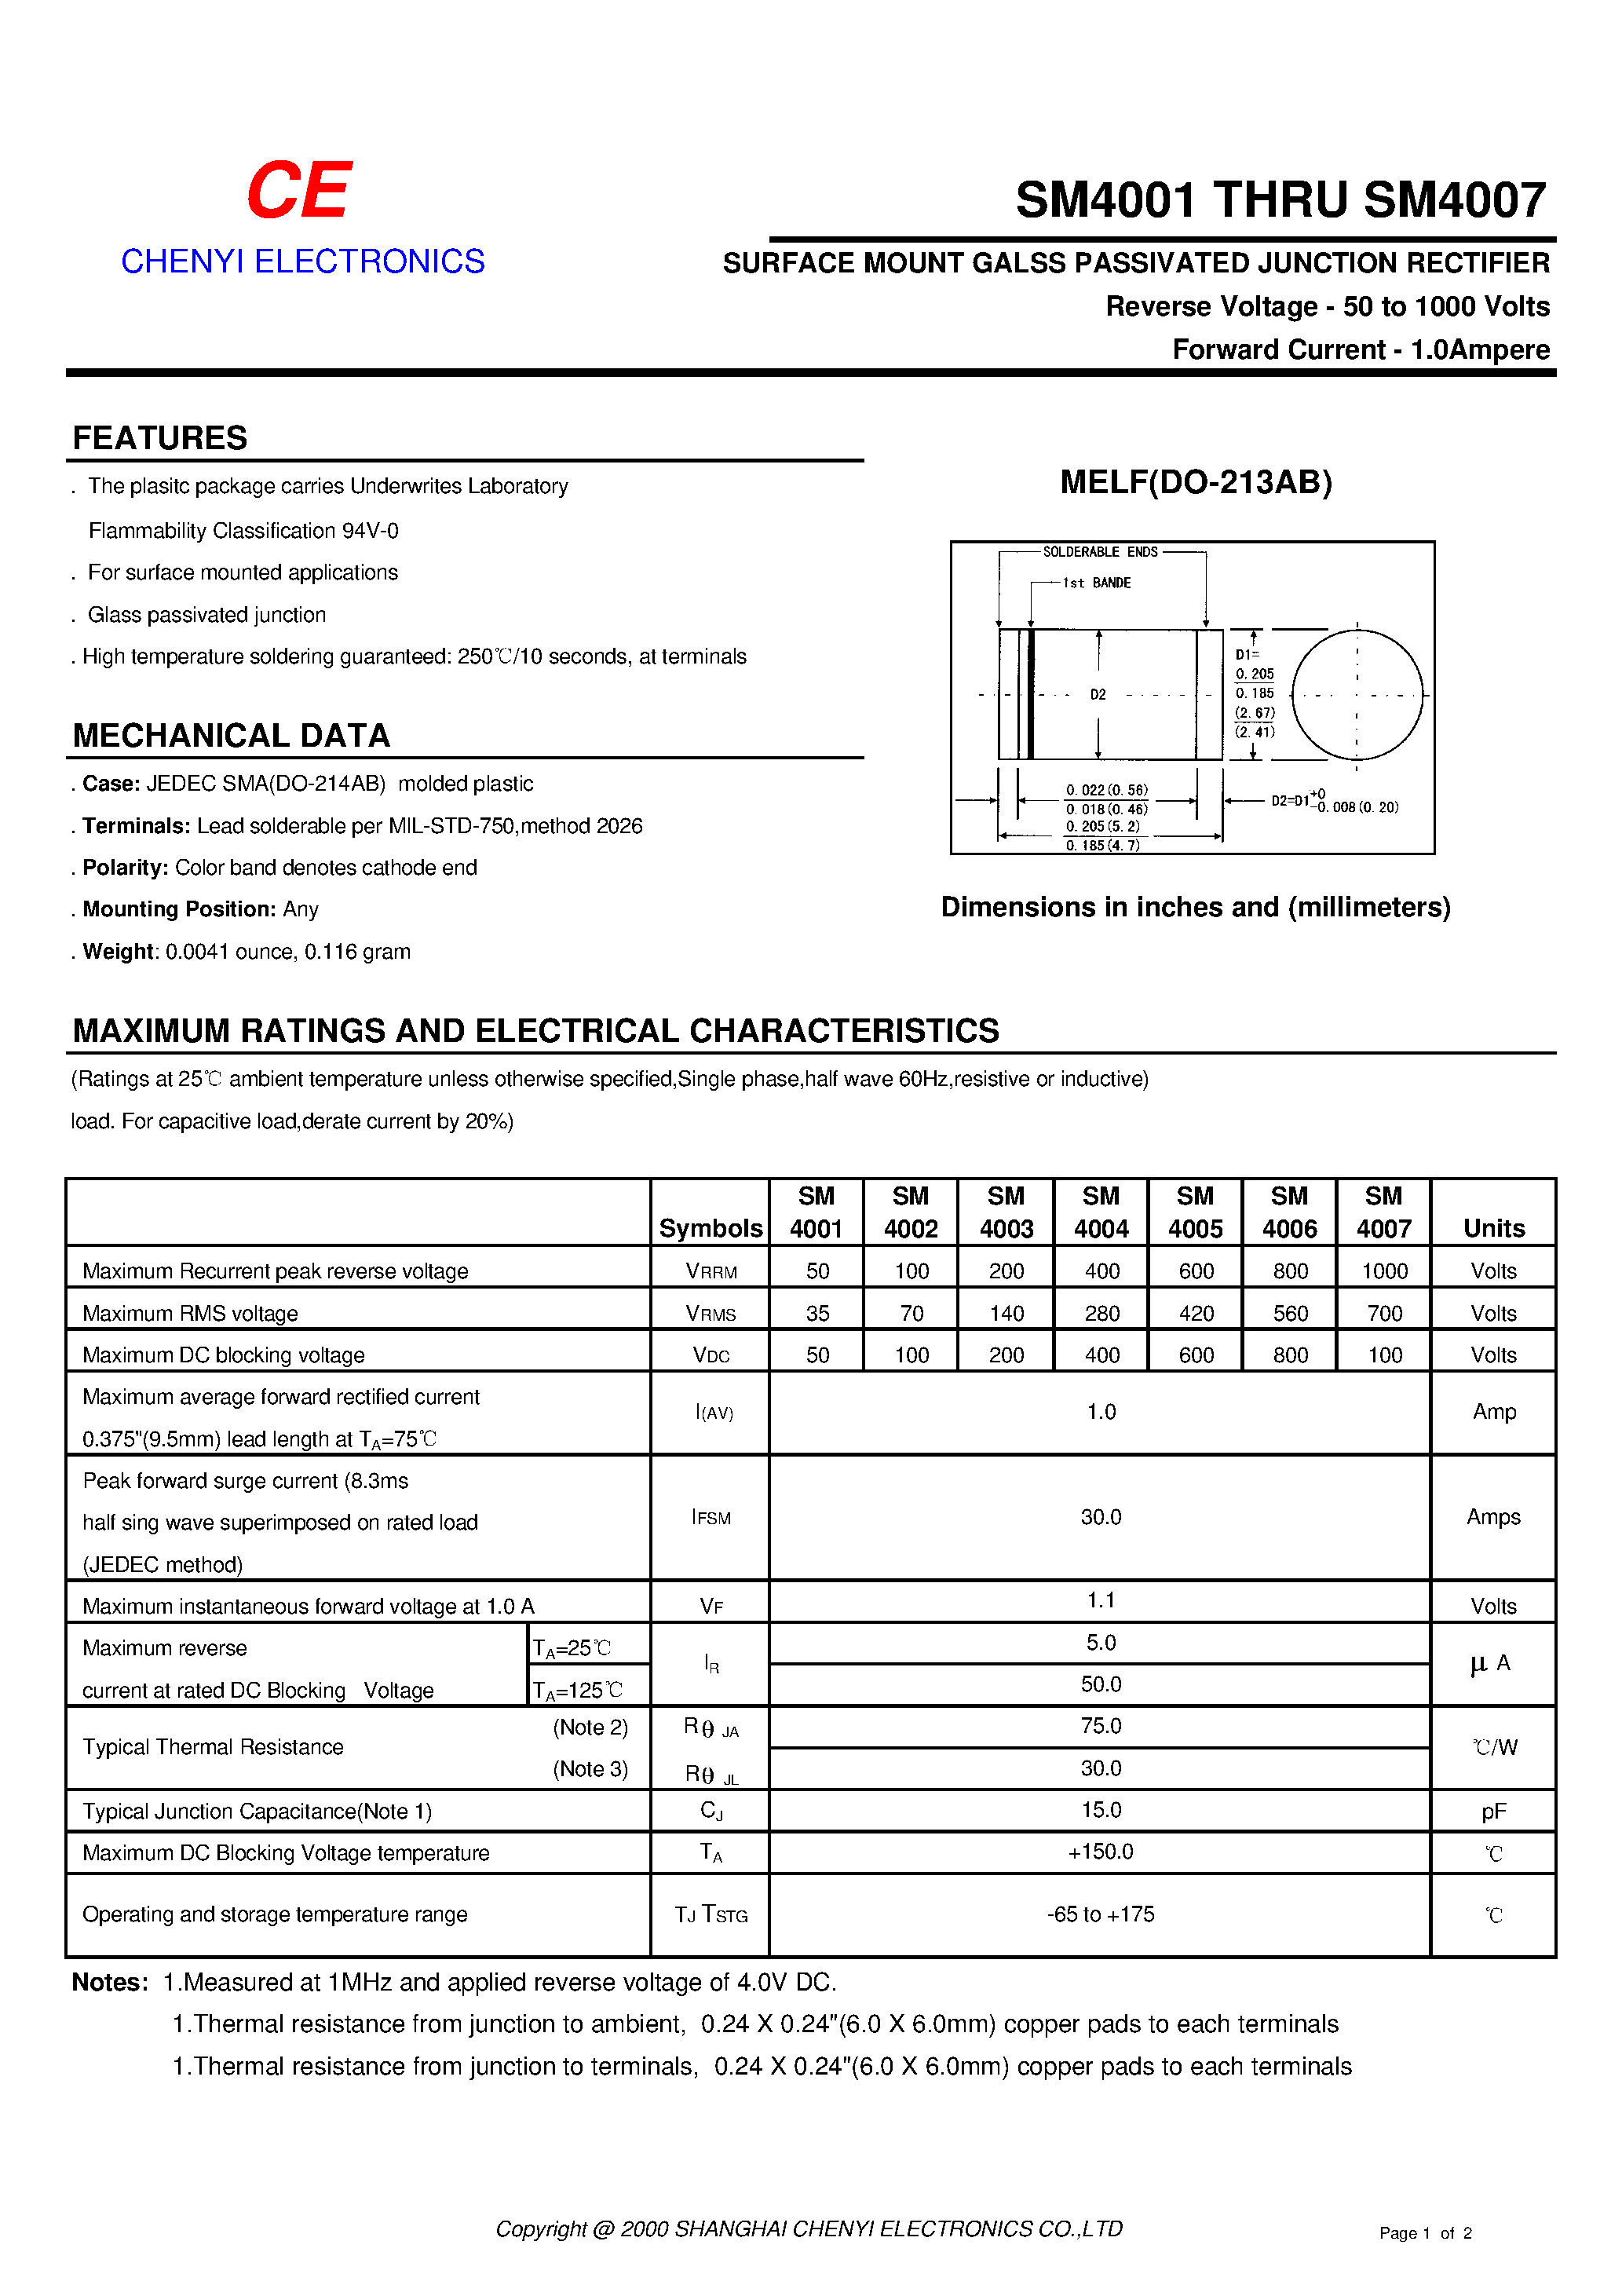 Даташит SM4002 - SURFACE MOUNT GALSS PASSIVATED JUNCTION RECTIFIER страница 1